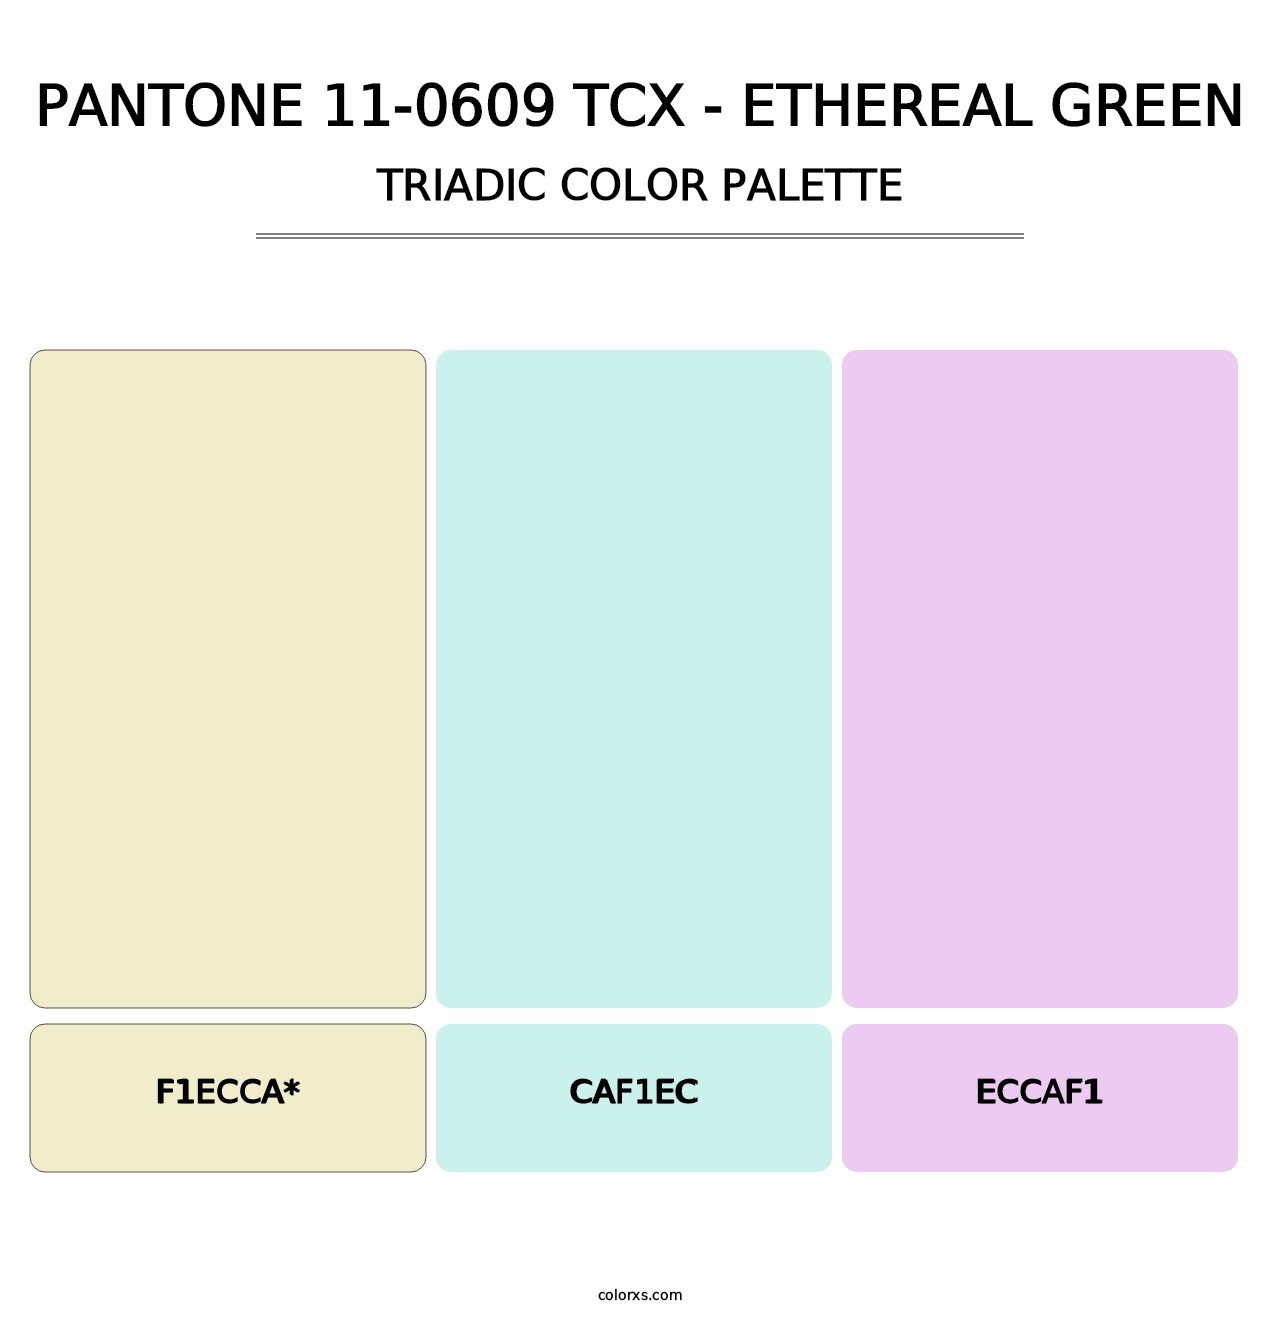 PANTONE 11-0609 TCX - Ethereal Green - Triadic Color Palette